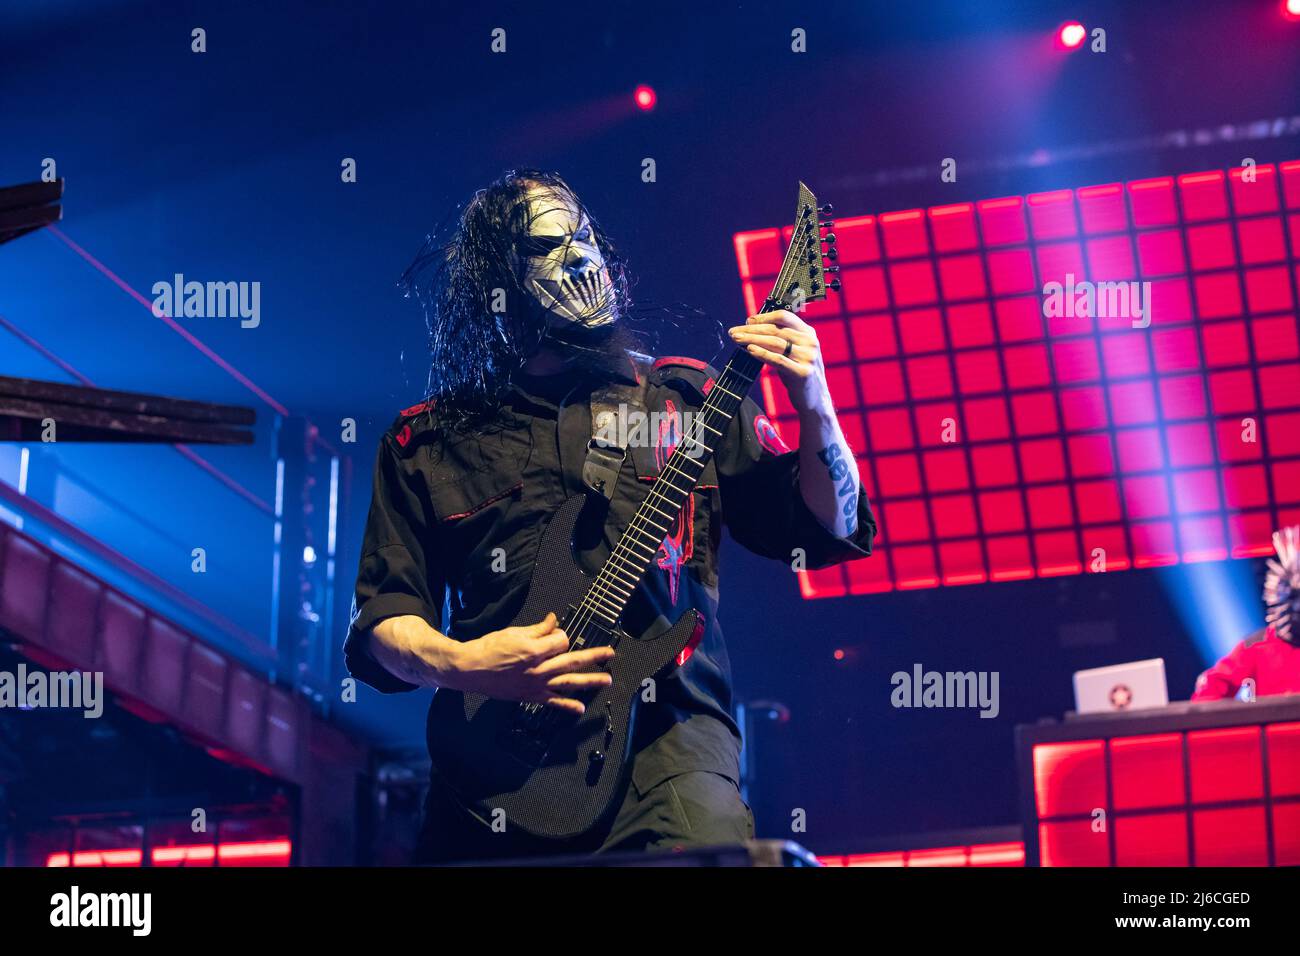 American heavy metal band Slipknot performing at Rogers Arena in Vancouver, BC, Canada, on April 17th 2022 Stock Photo